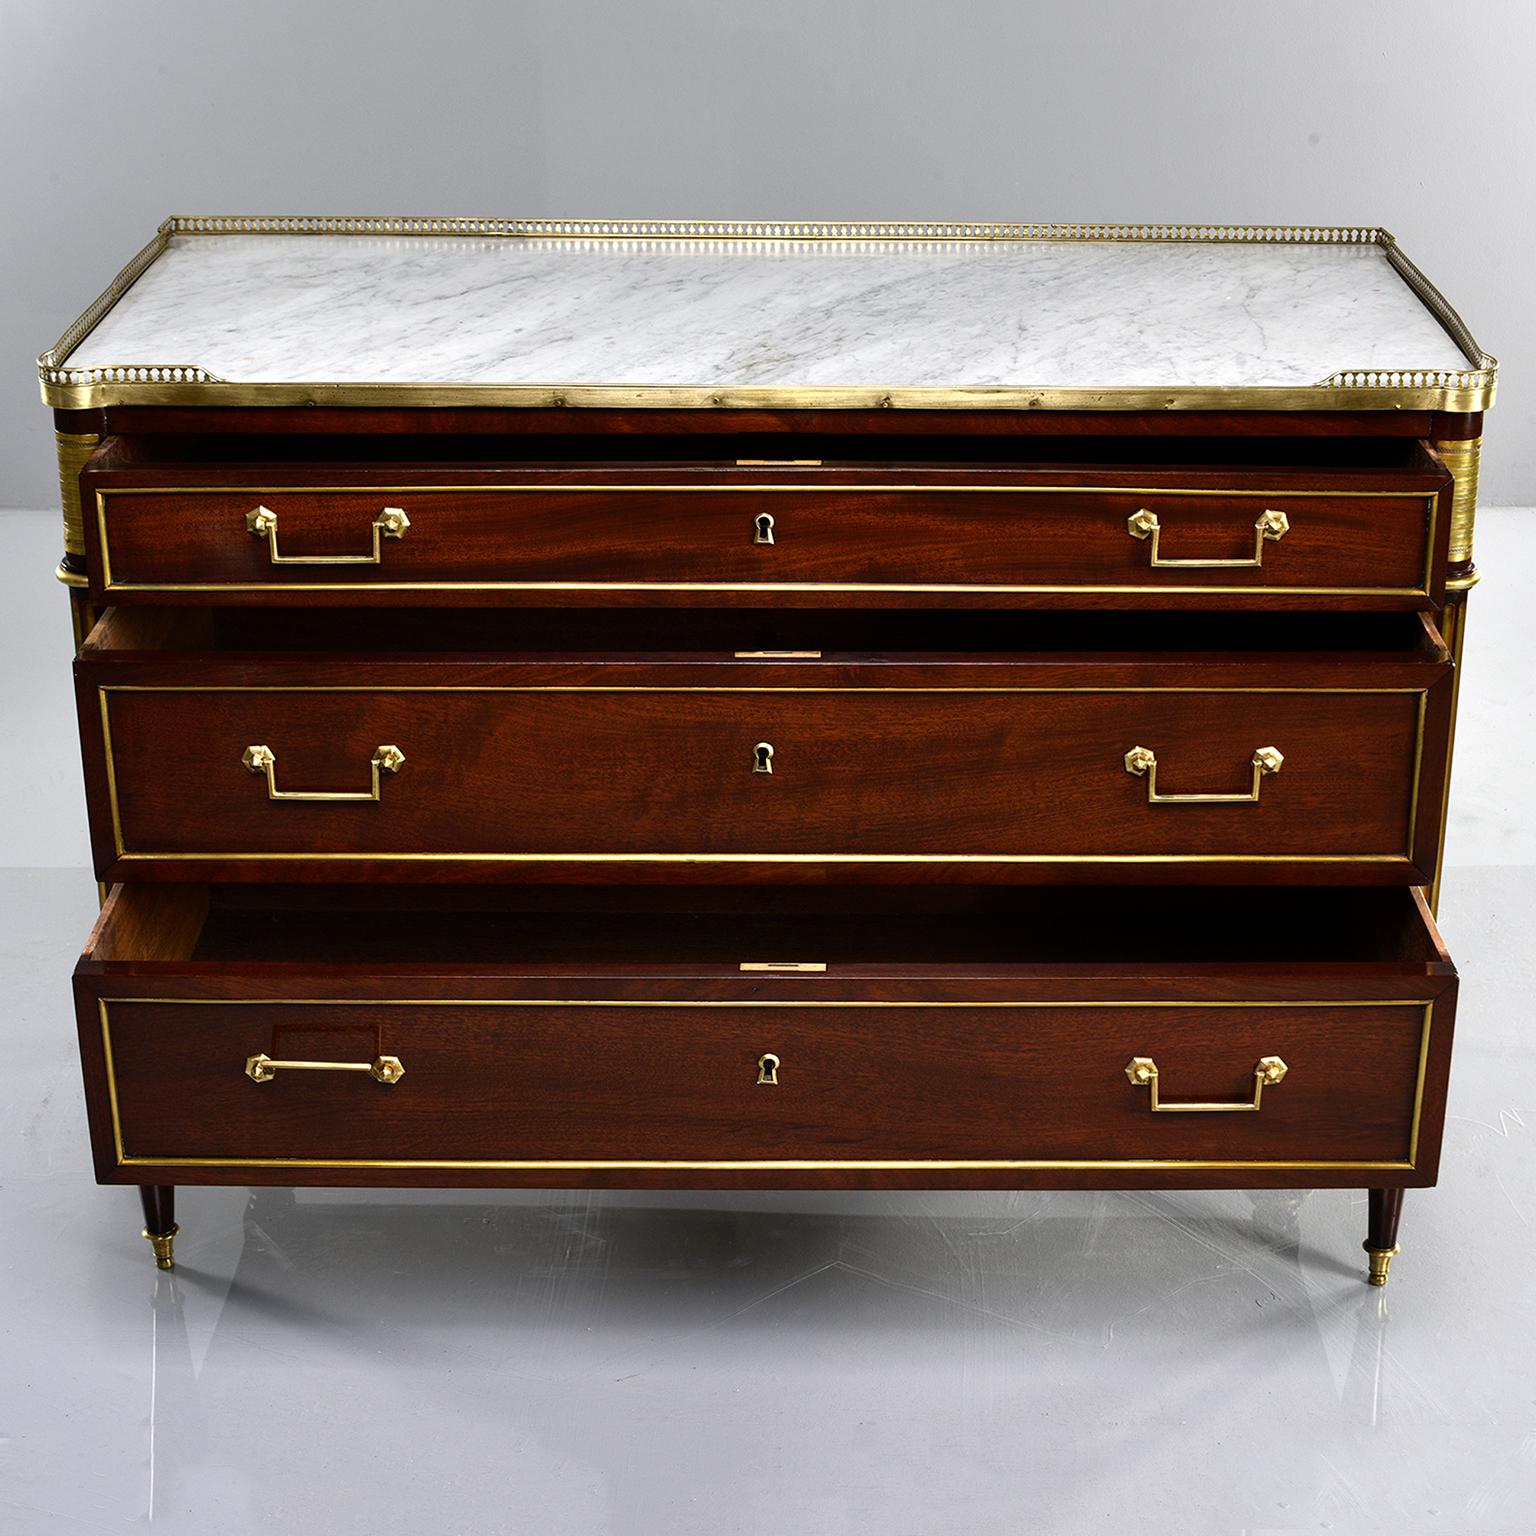 French 19th Century Louis XVI Style Commode with Brass Gallery and Marble Top